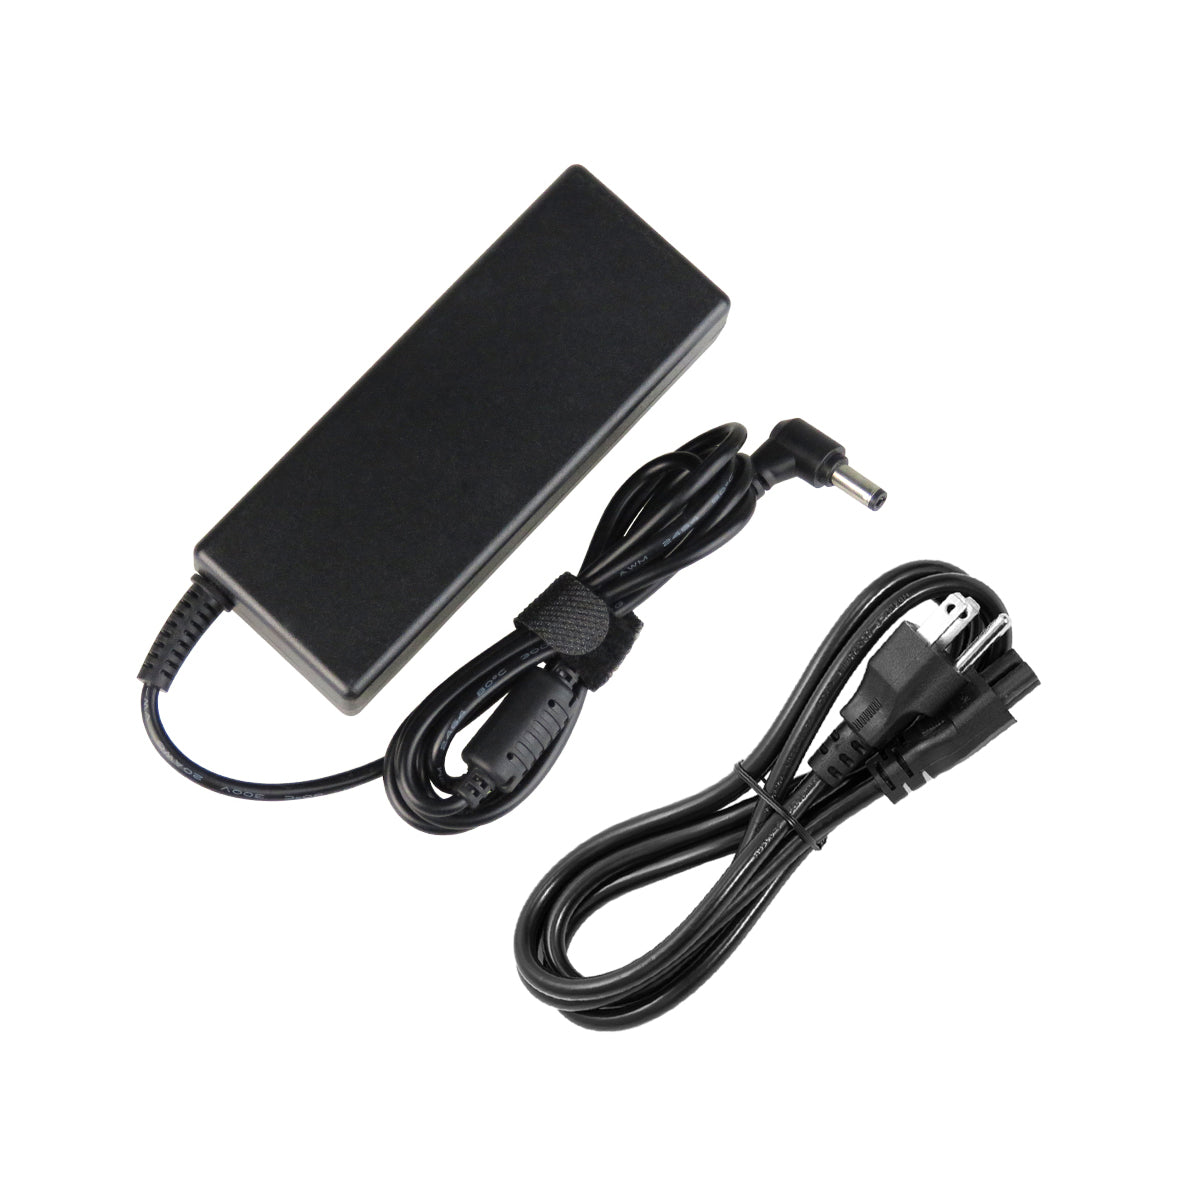 AC Adapter Charger for Gateway M465 Notebook.